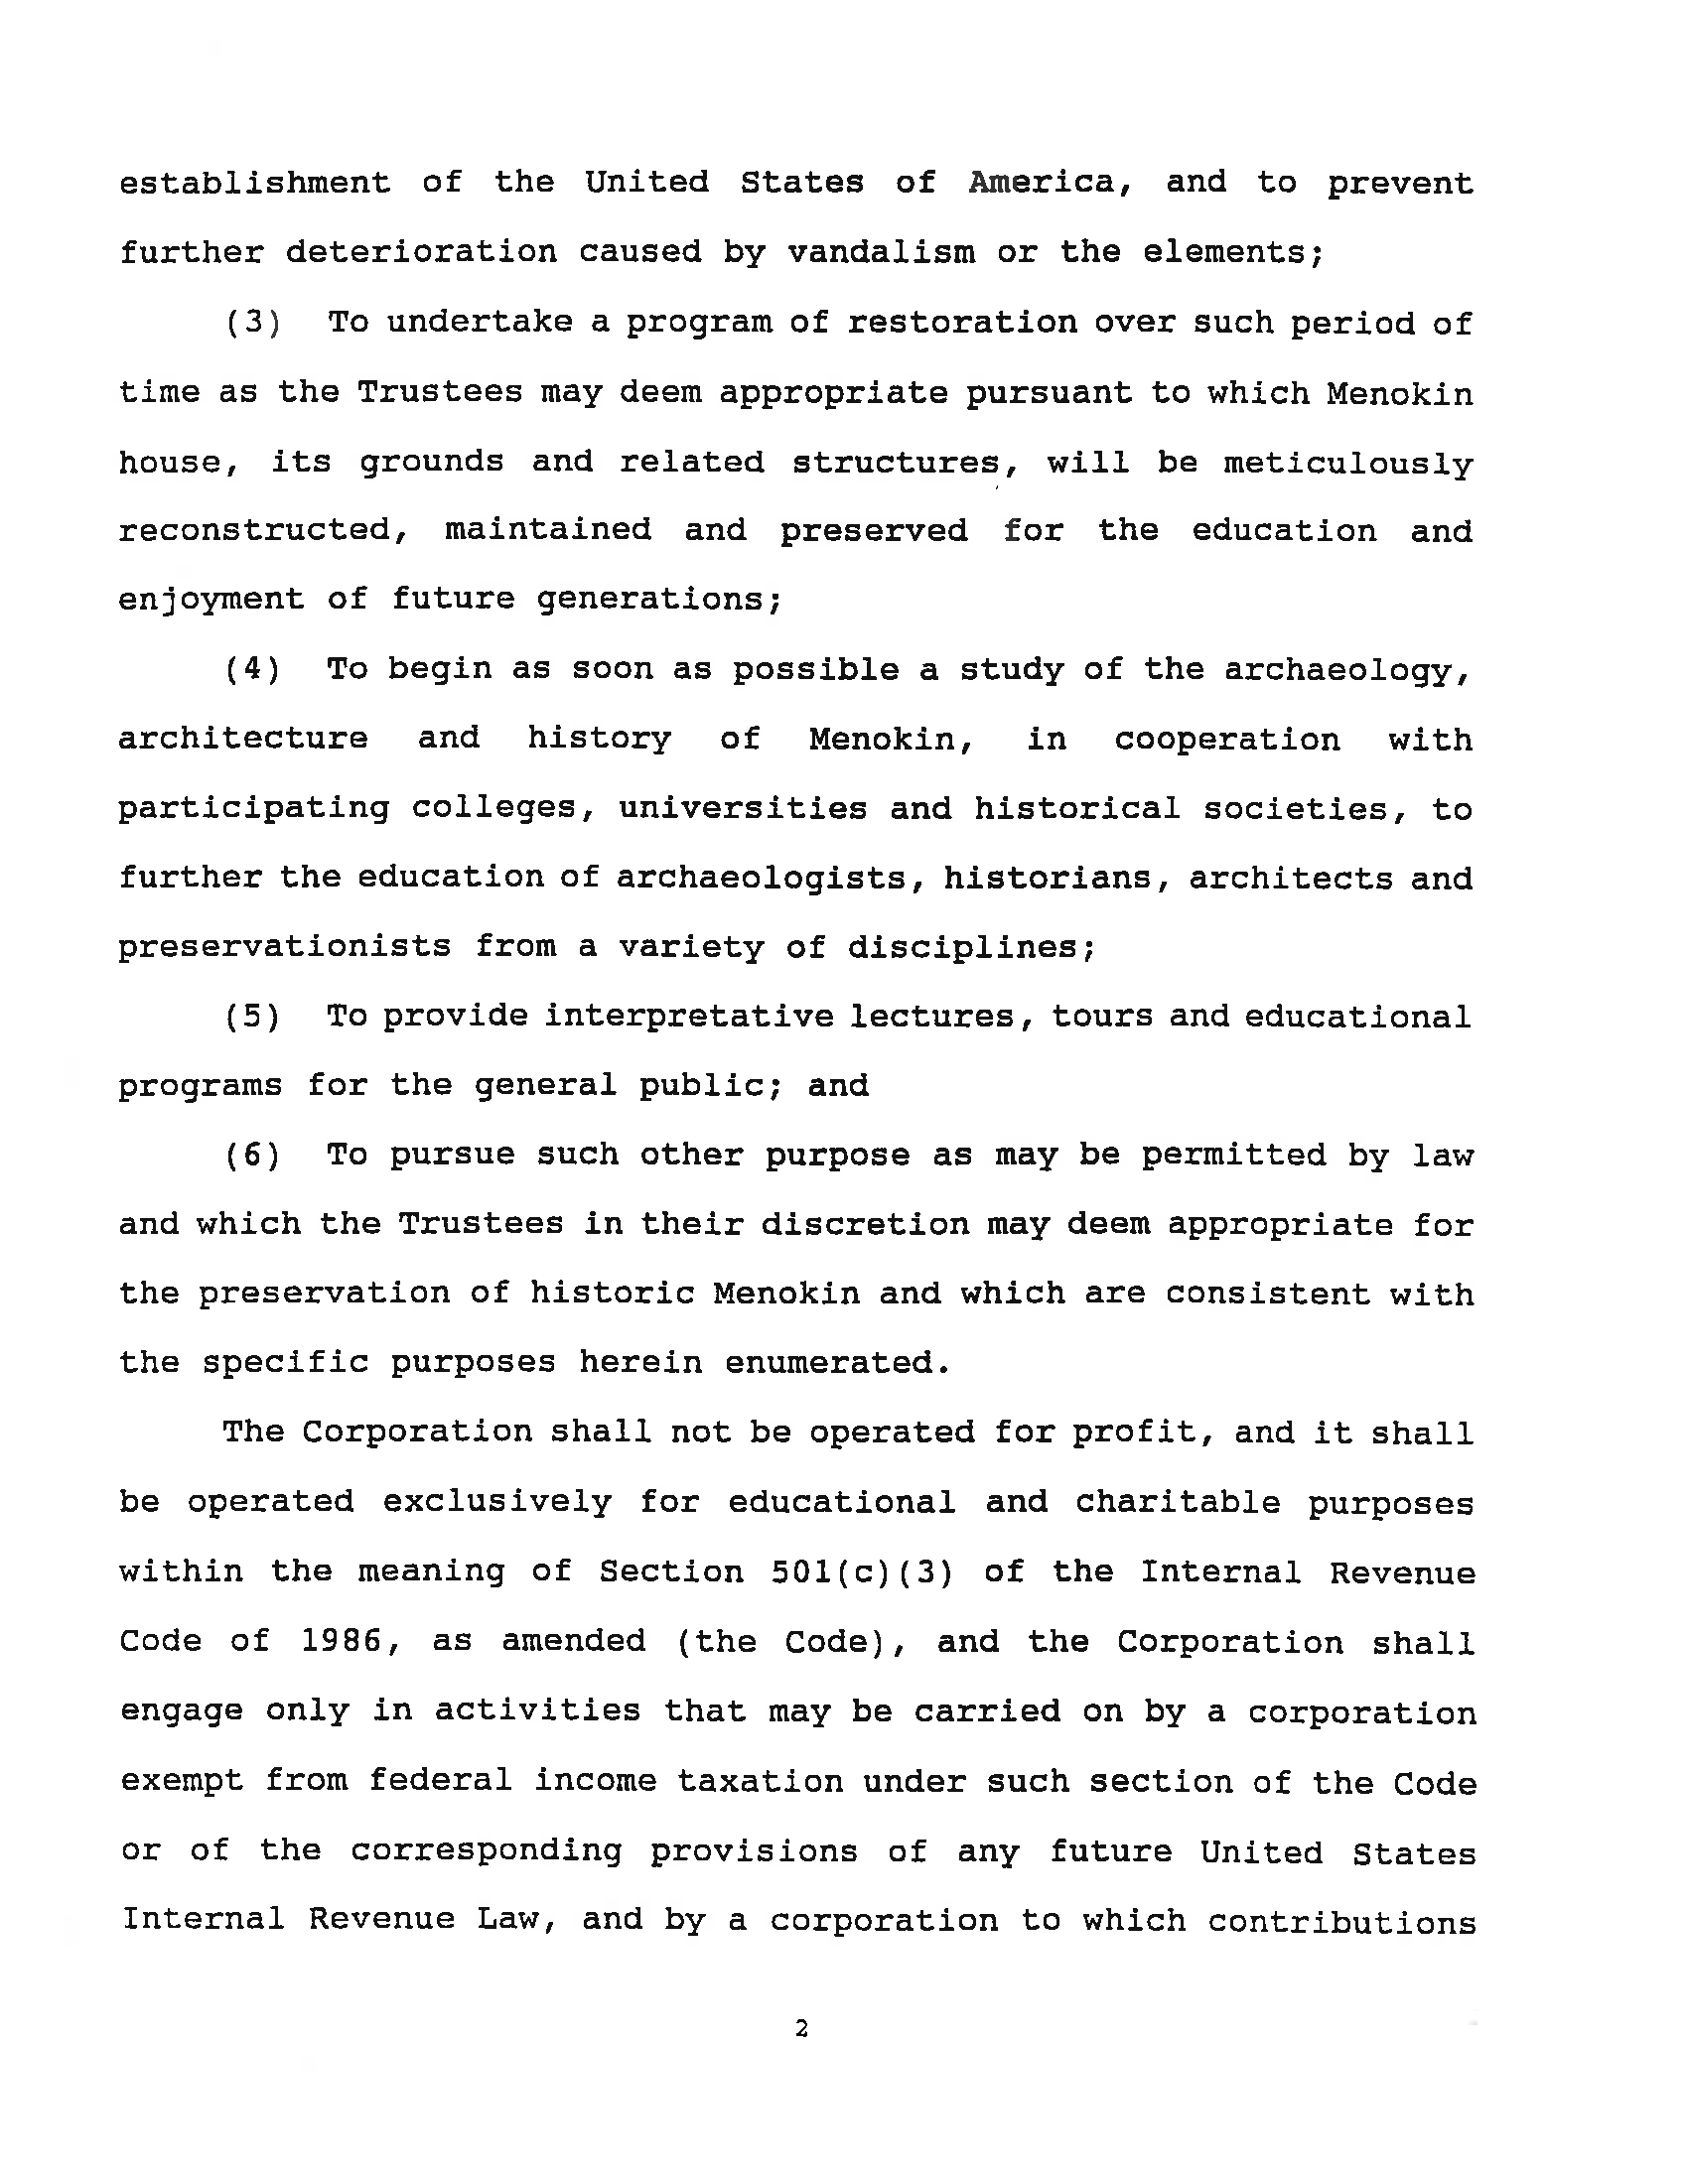 Menokin Foundation Articles of Incorporation_Page_04.png